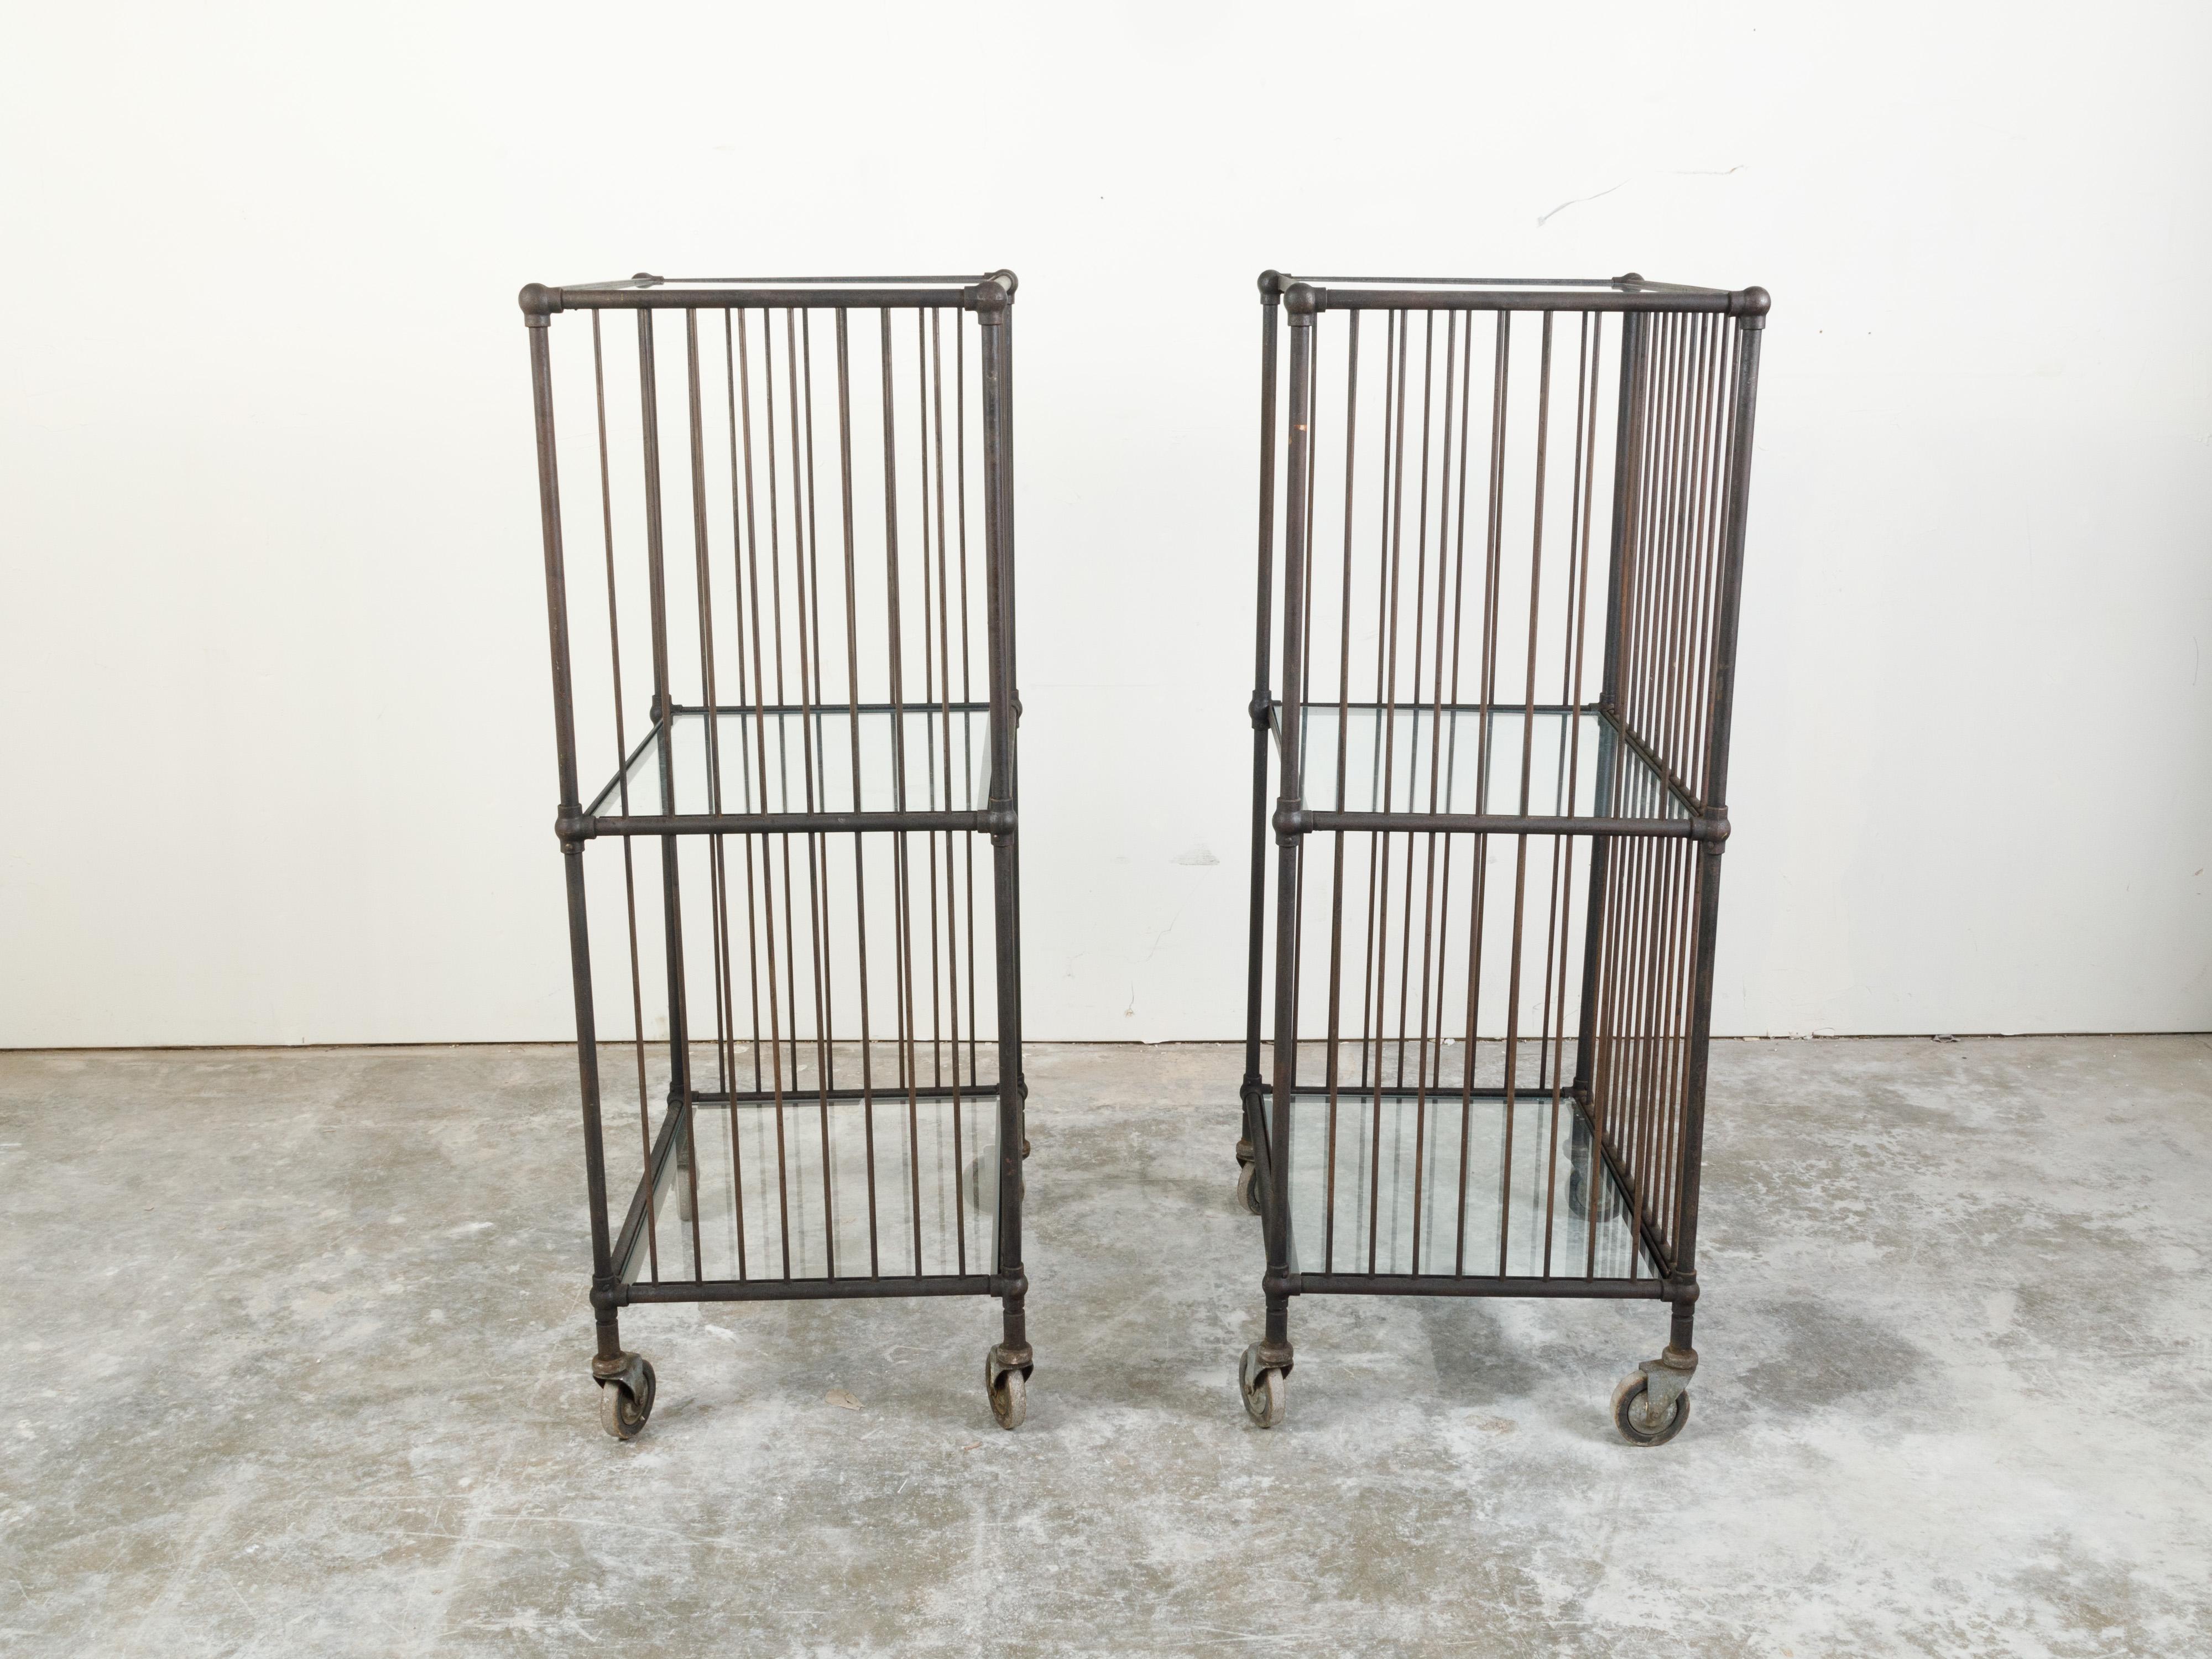 Vintage Industrial Carts with Glass Shelves and Casters, Sold Individually For Sale 4